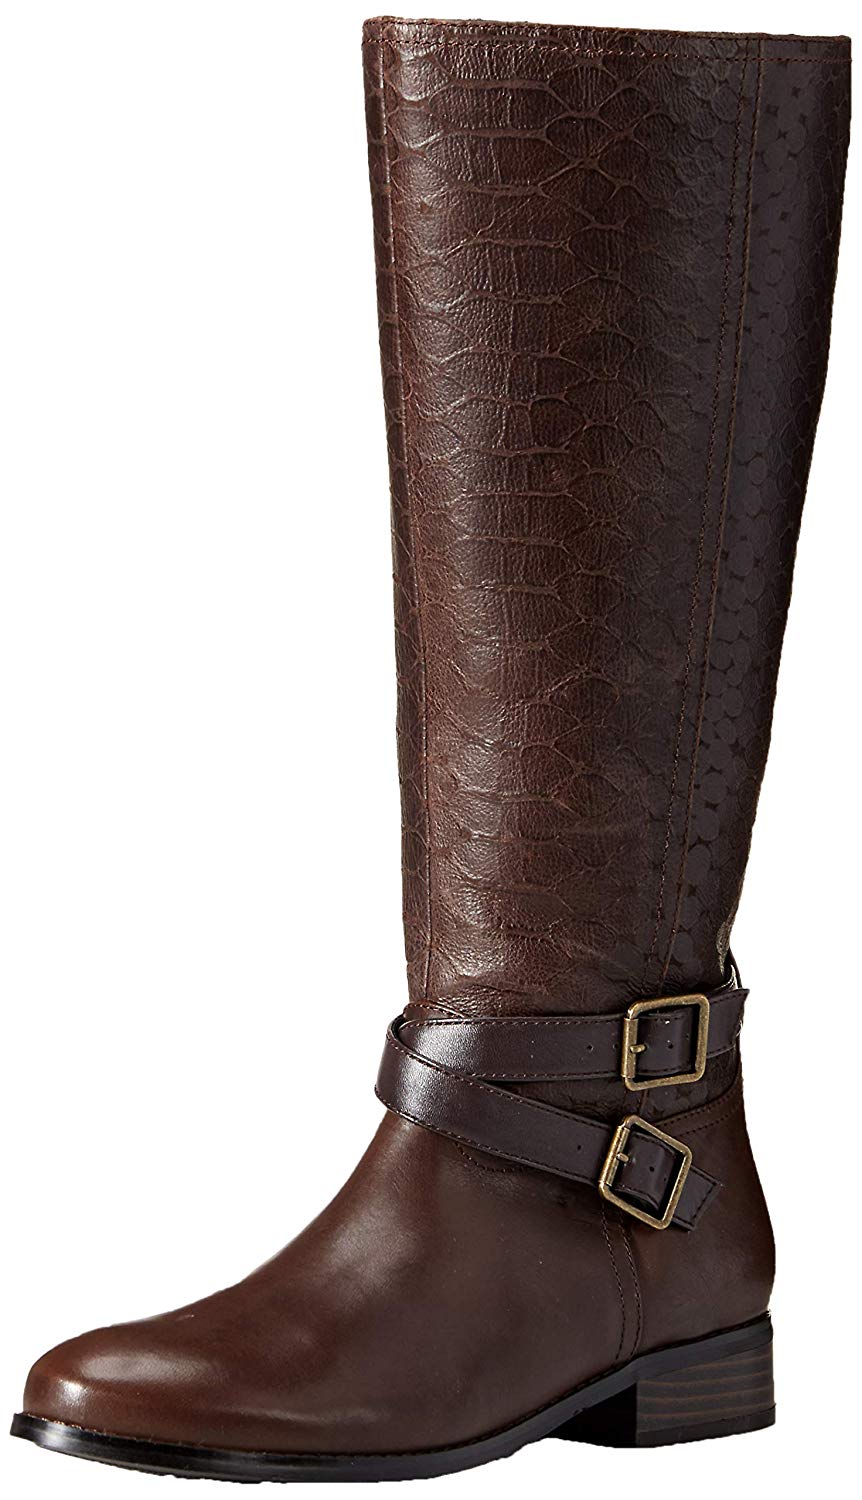 Trotters Womens Liberty Almond Toe Knee High Fashion Boots, Brown, Size ...